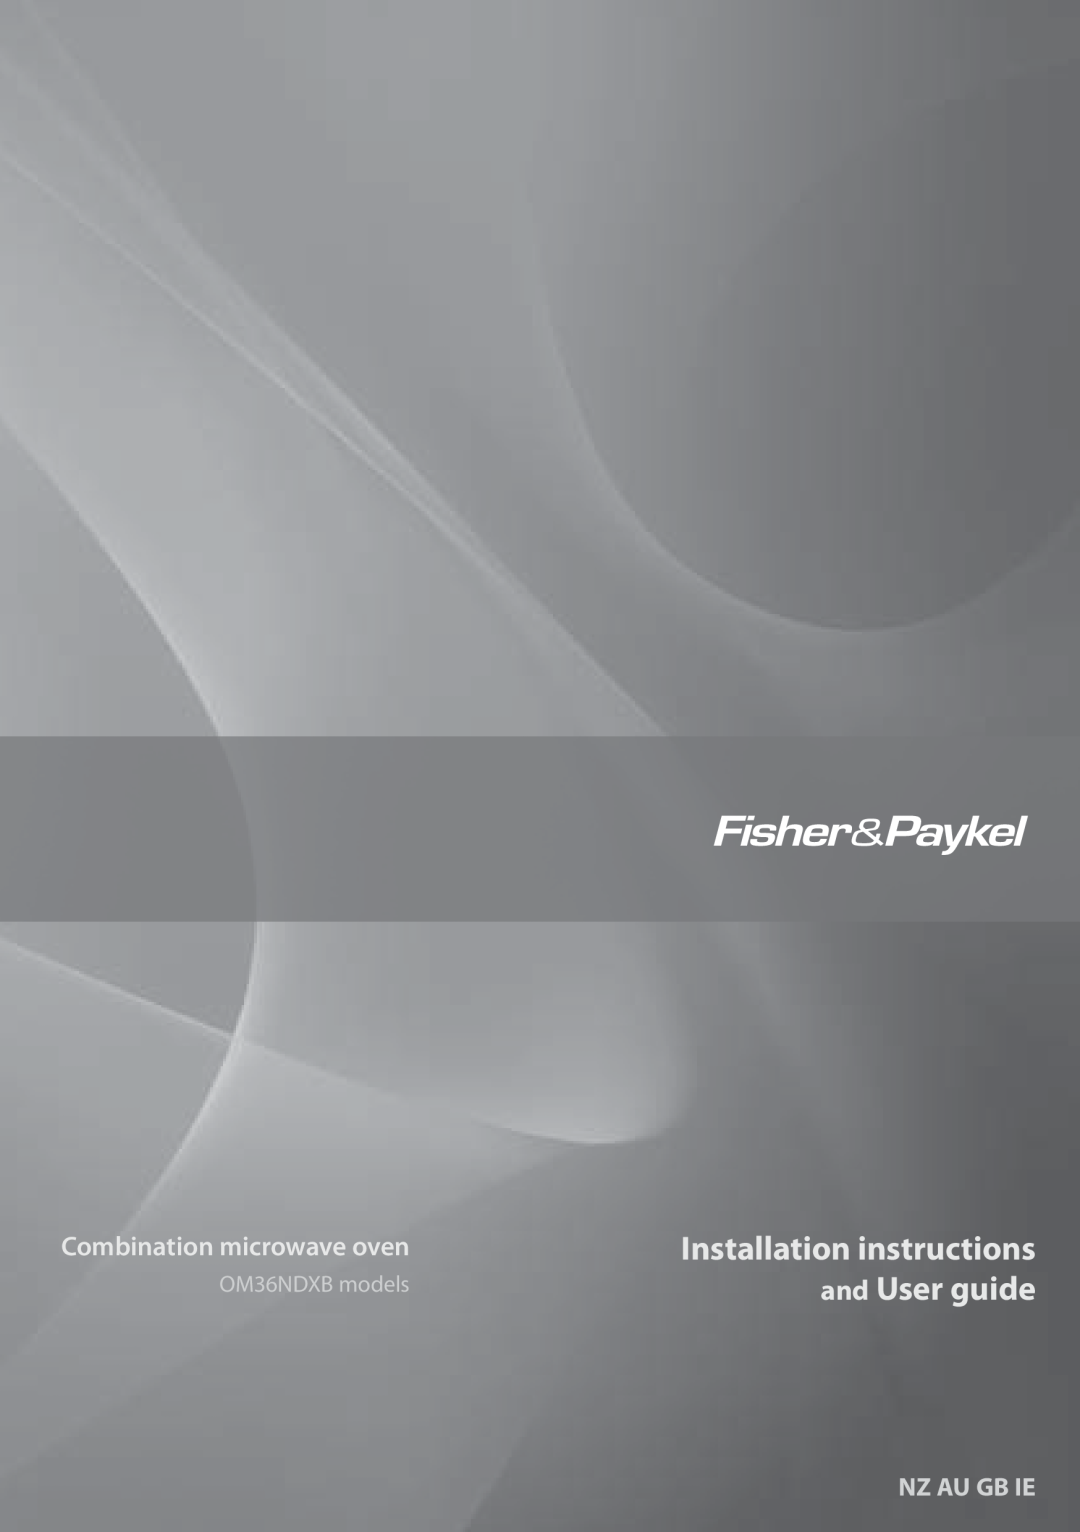 Fisher & Paykel installation instructions and User guide, Installation instructions, Nz Au Gb Ie, OM36NDXB models 